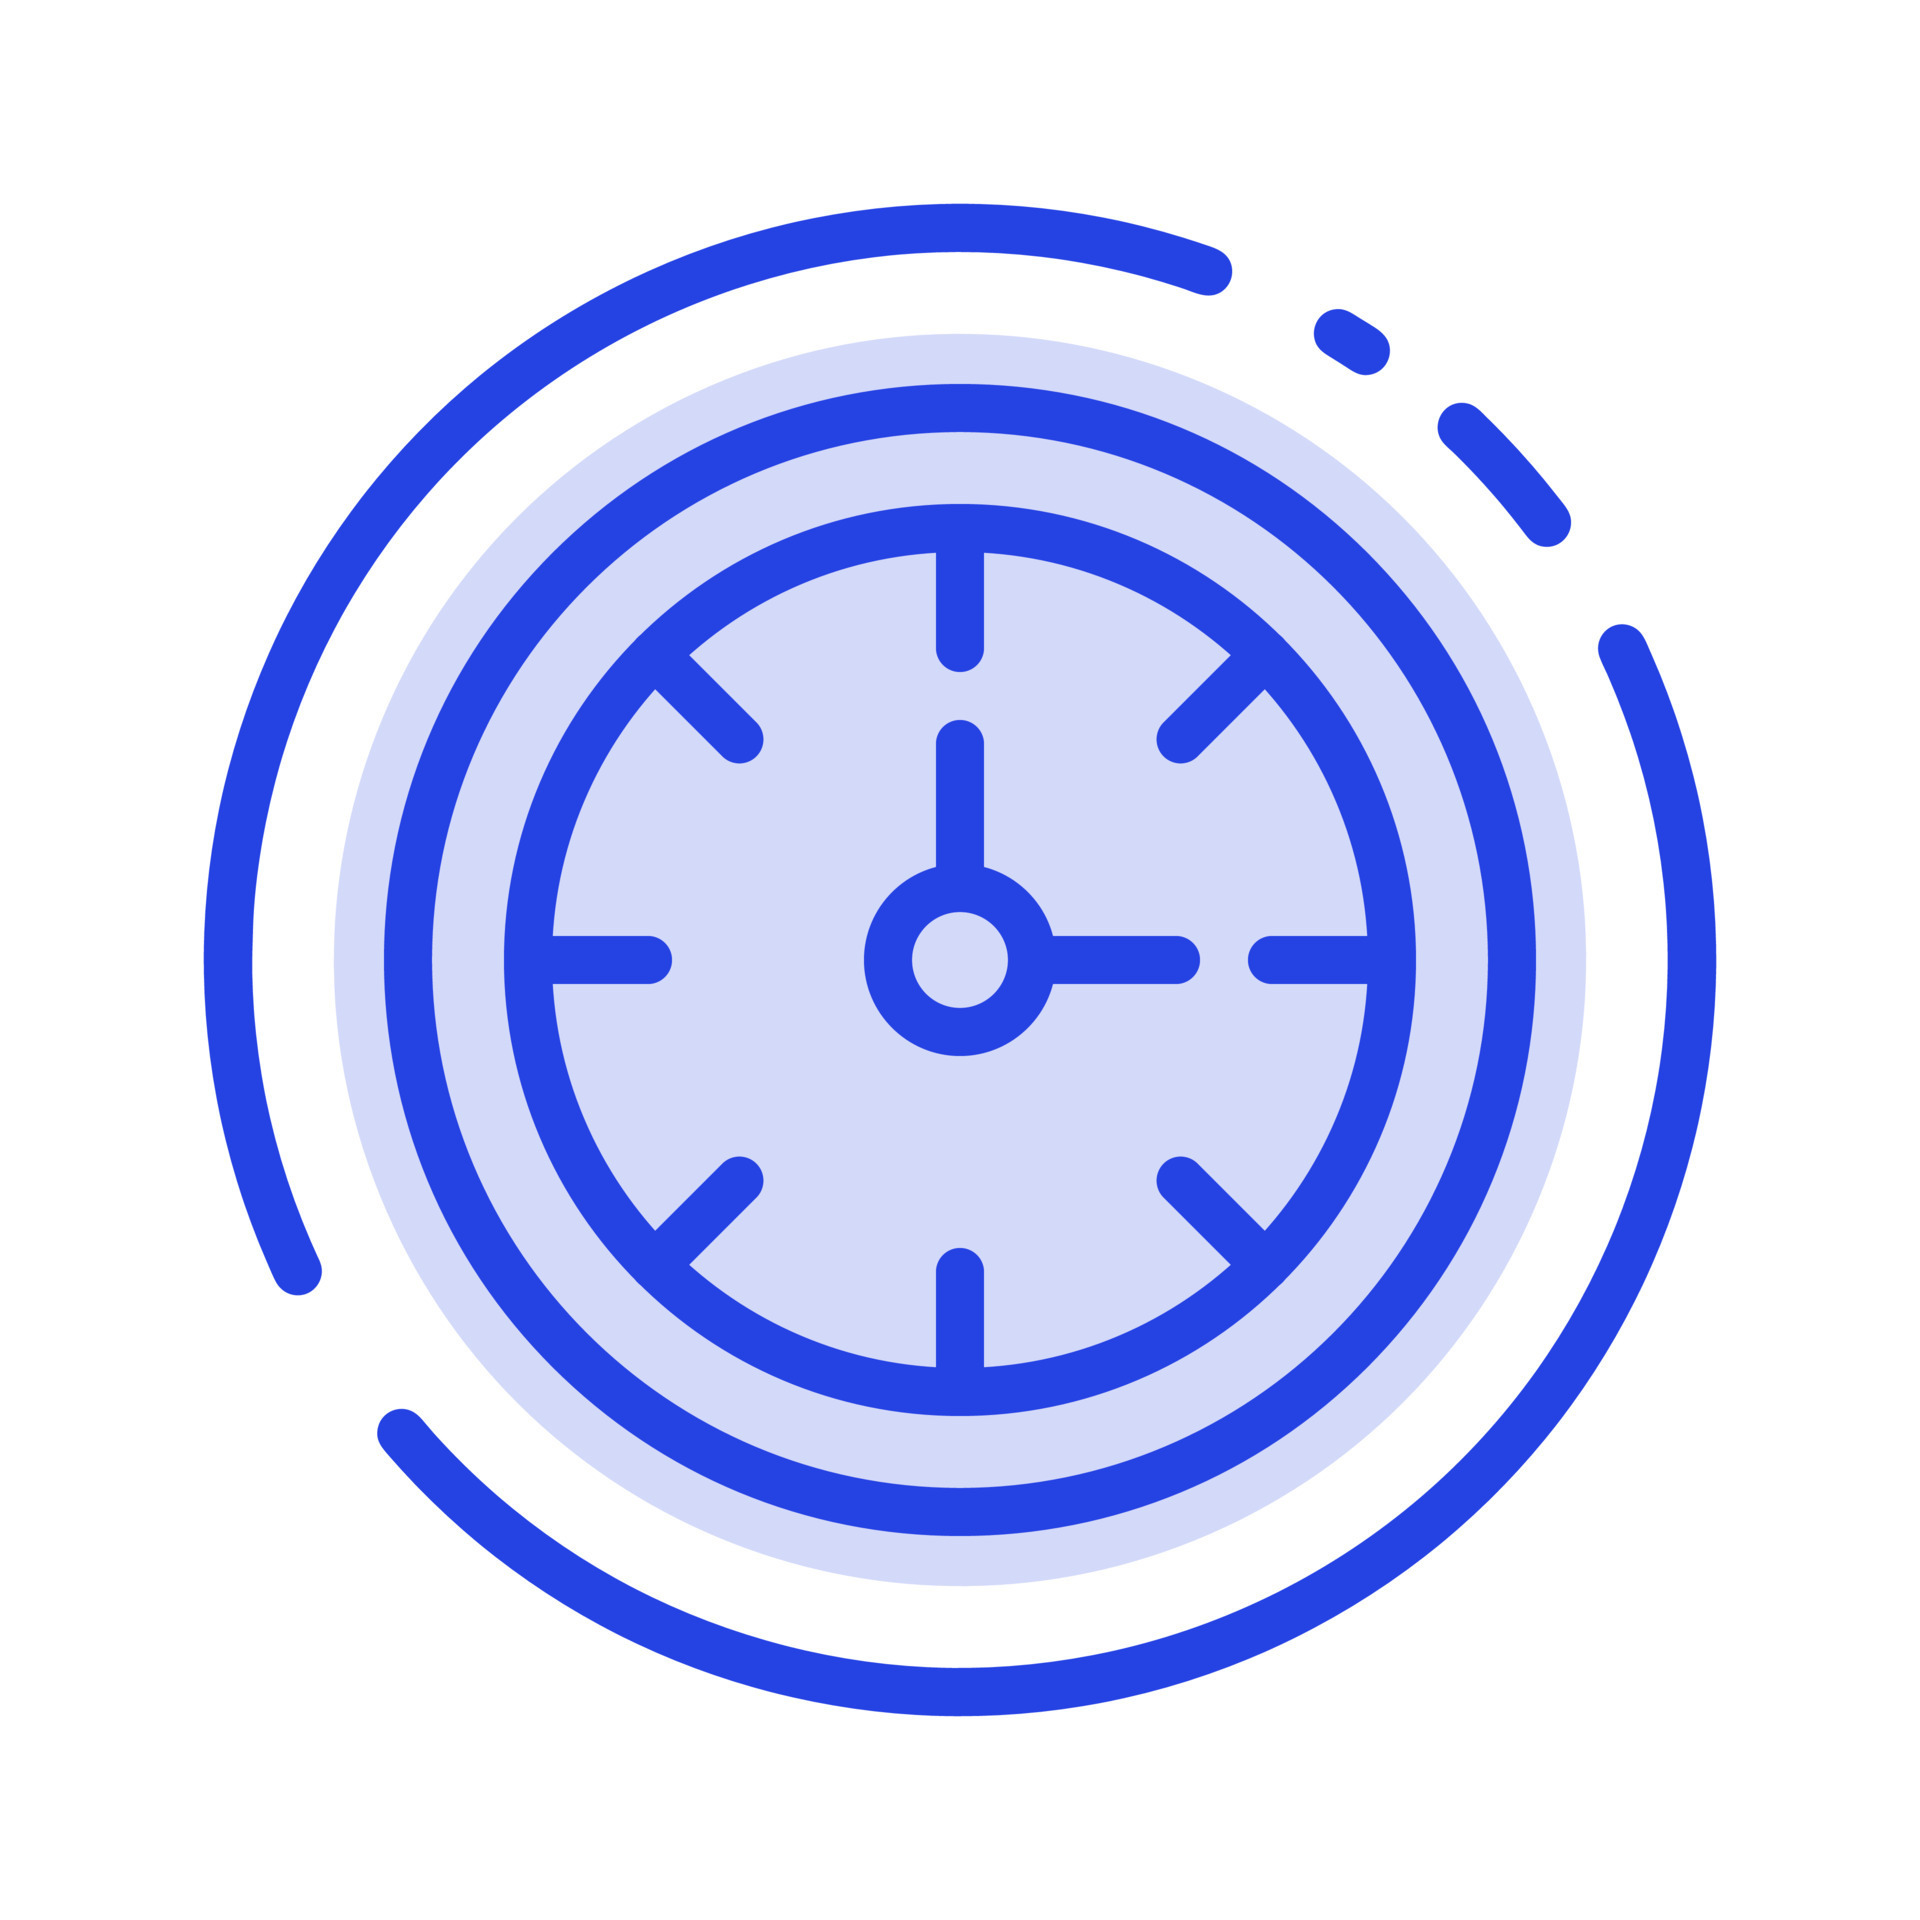 https://static.vecteezy.com/system/resources/previews/019/127/694/original/alarm-clock-stopwatch-time-blue-dotted-line-line-icon-free-vector.jpg